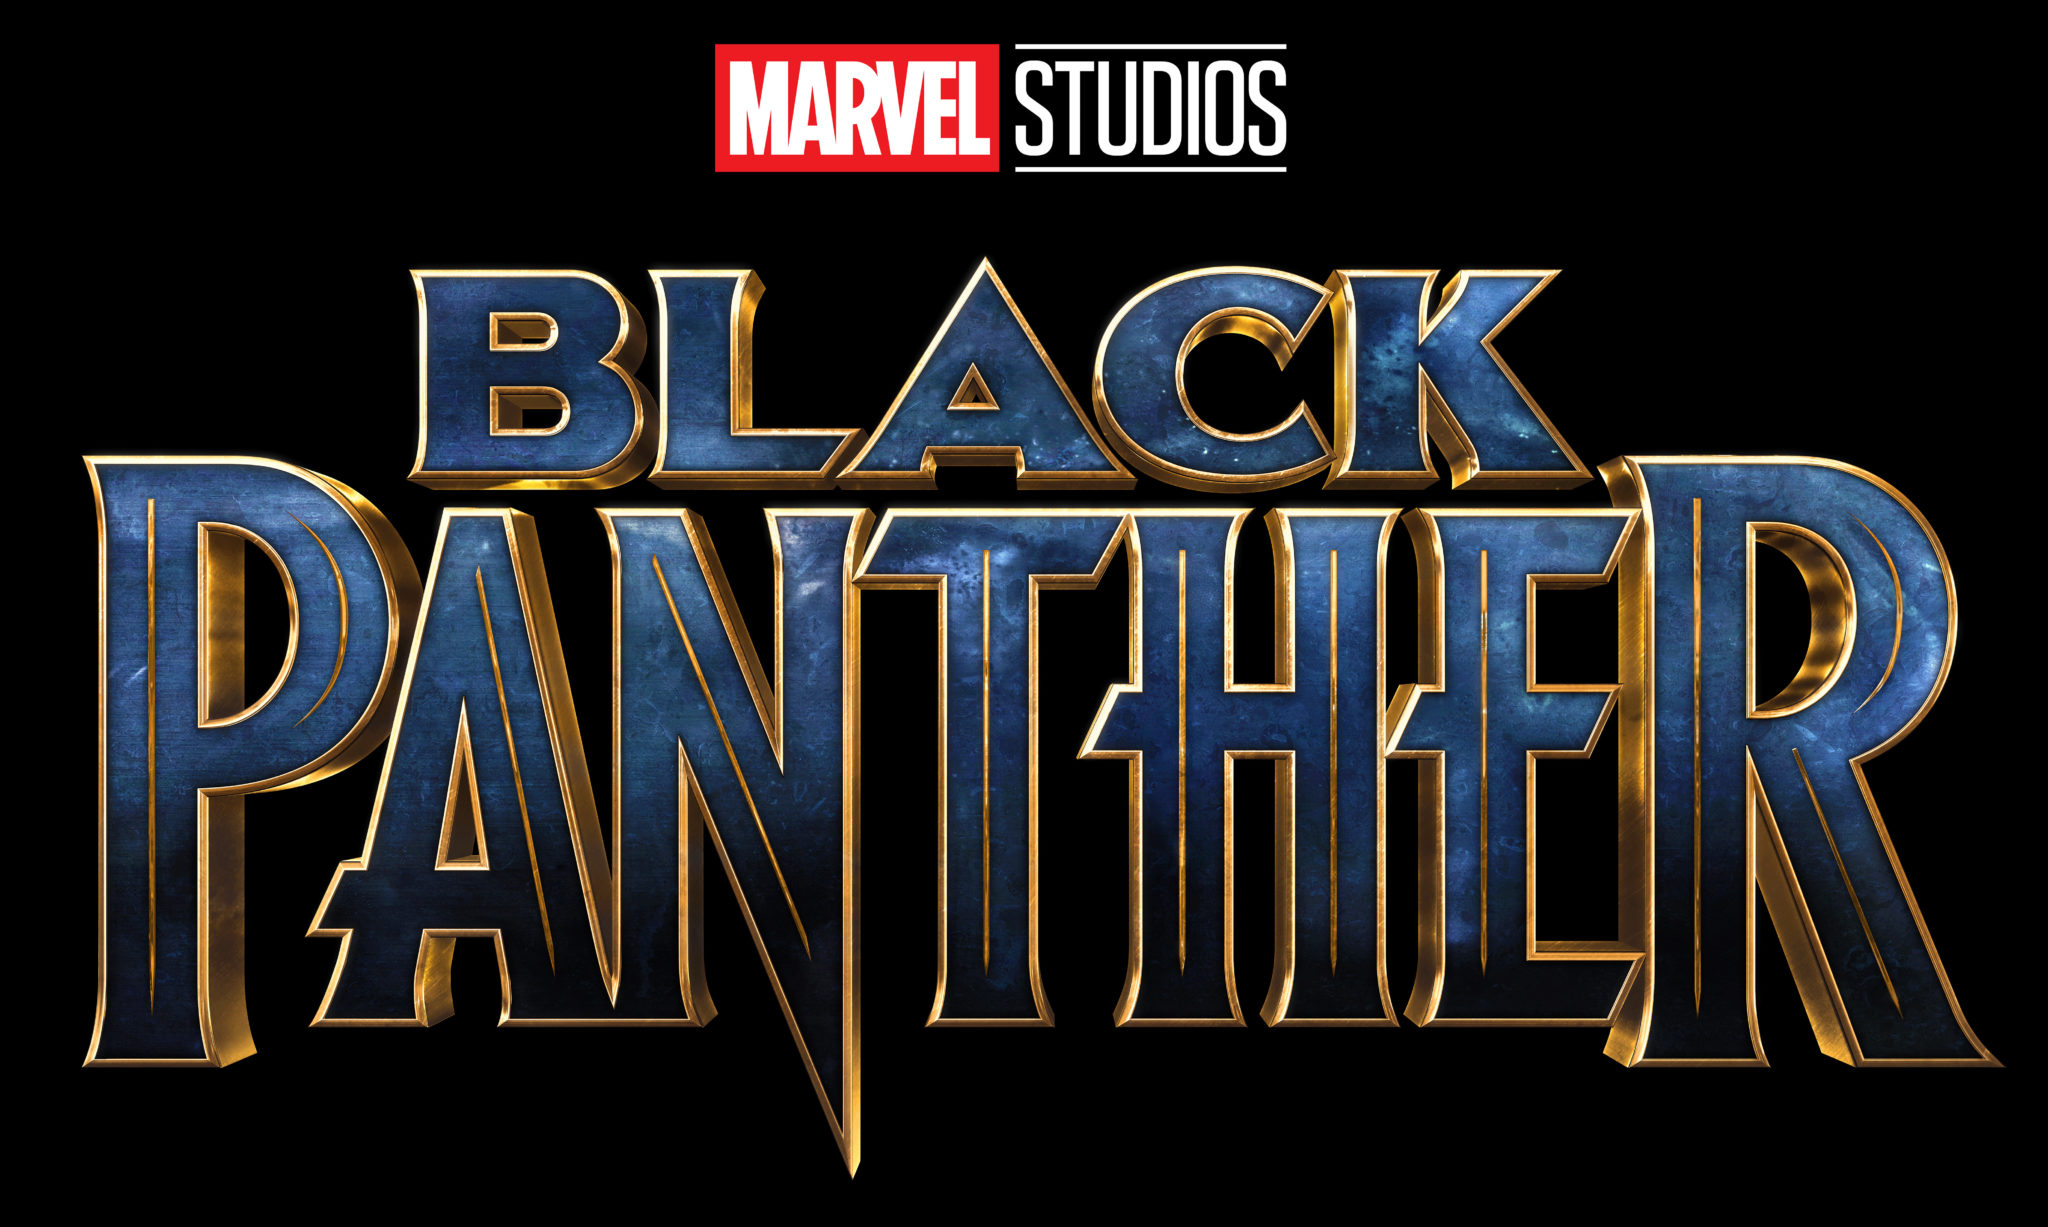 ‘Black Panther’ Arrives on DVD and Digital Download Next Month PLUS Check Out Bonus Footage From the Movie Now